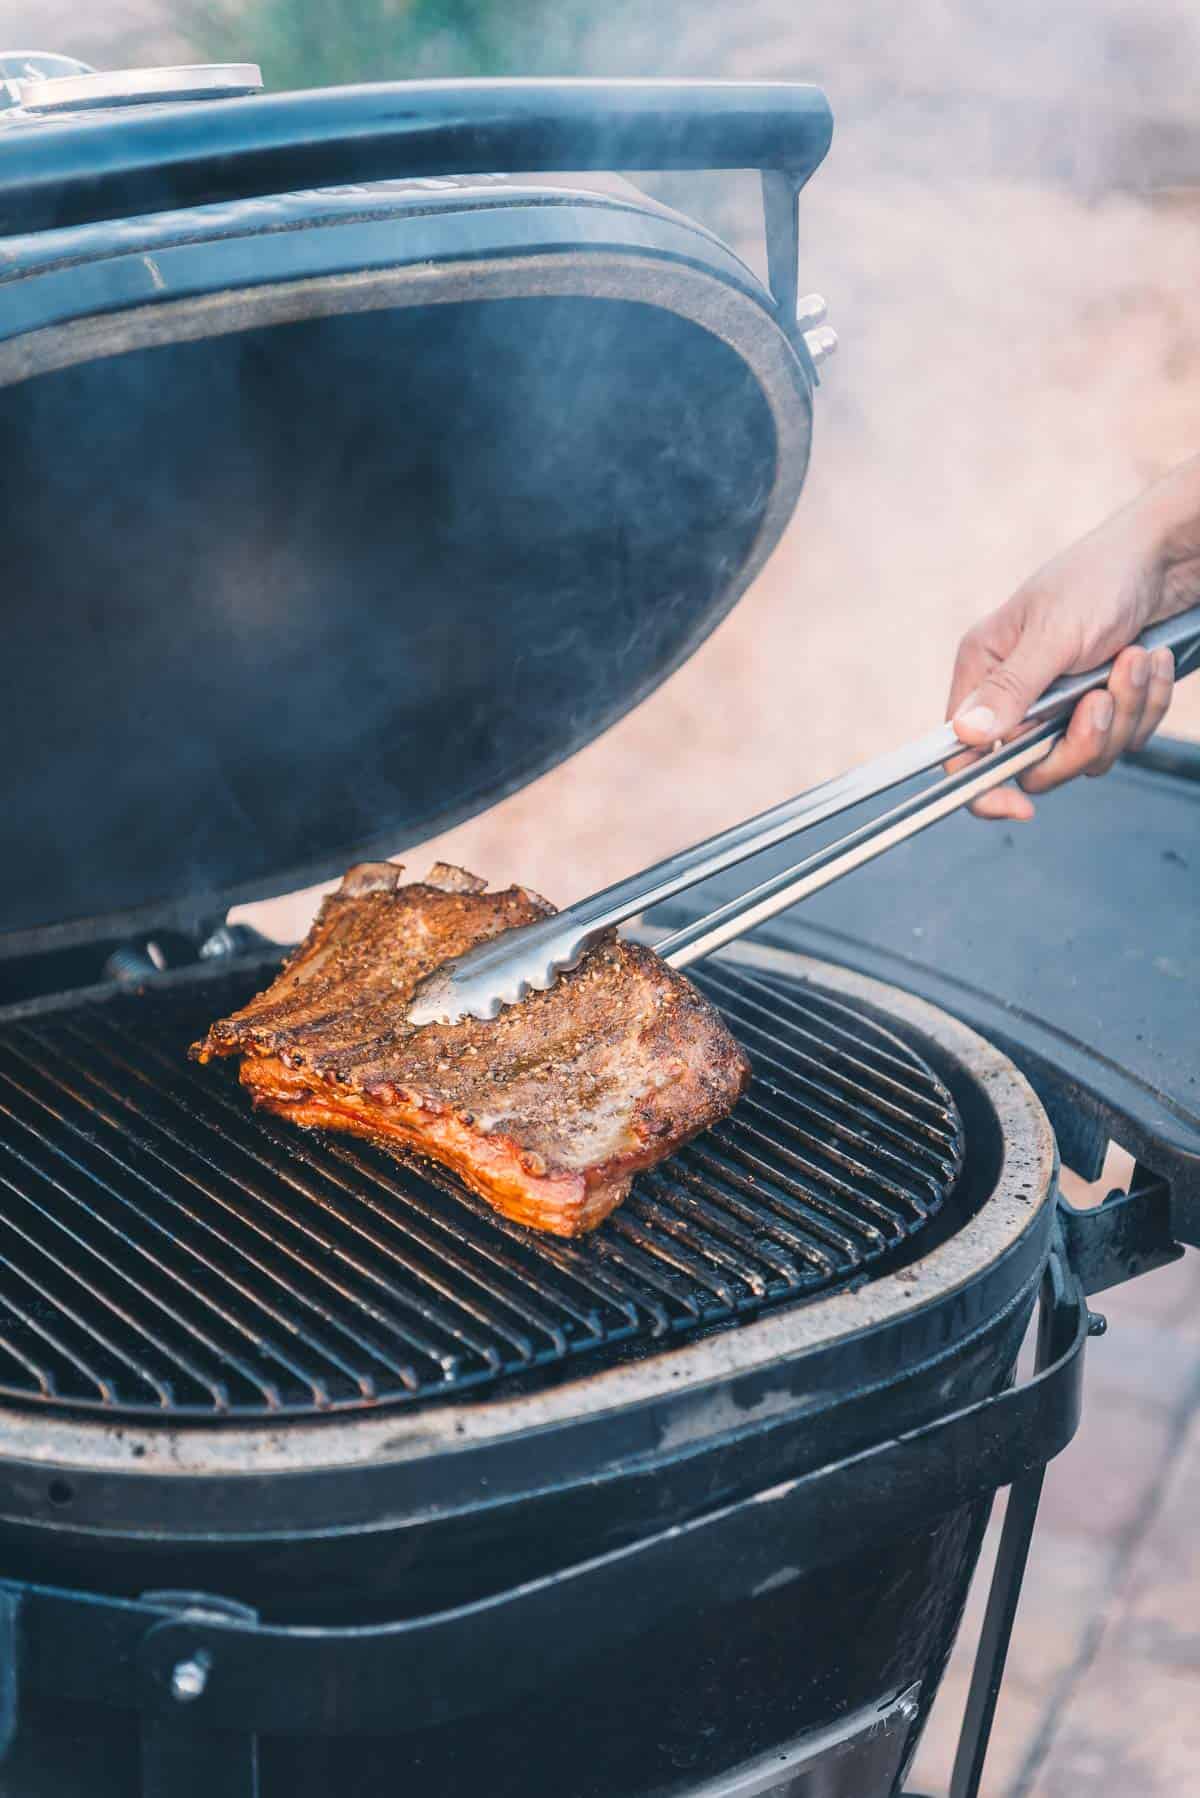 Lamb ribs being placed fat side down on the grill with long tongs.